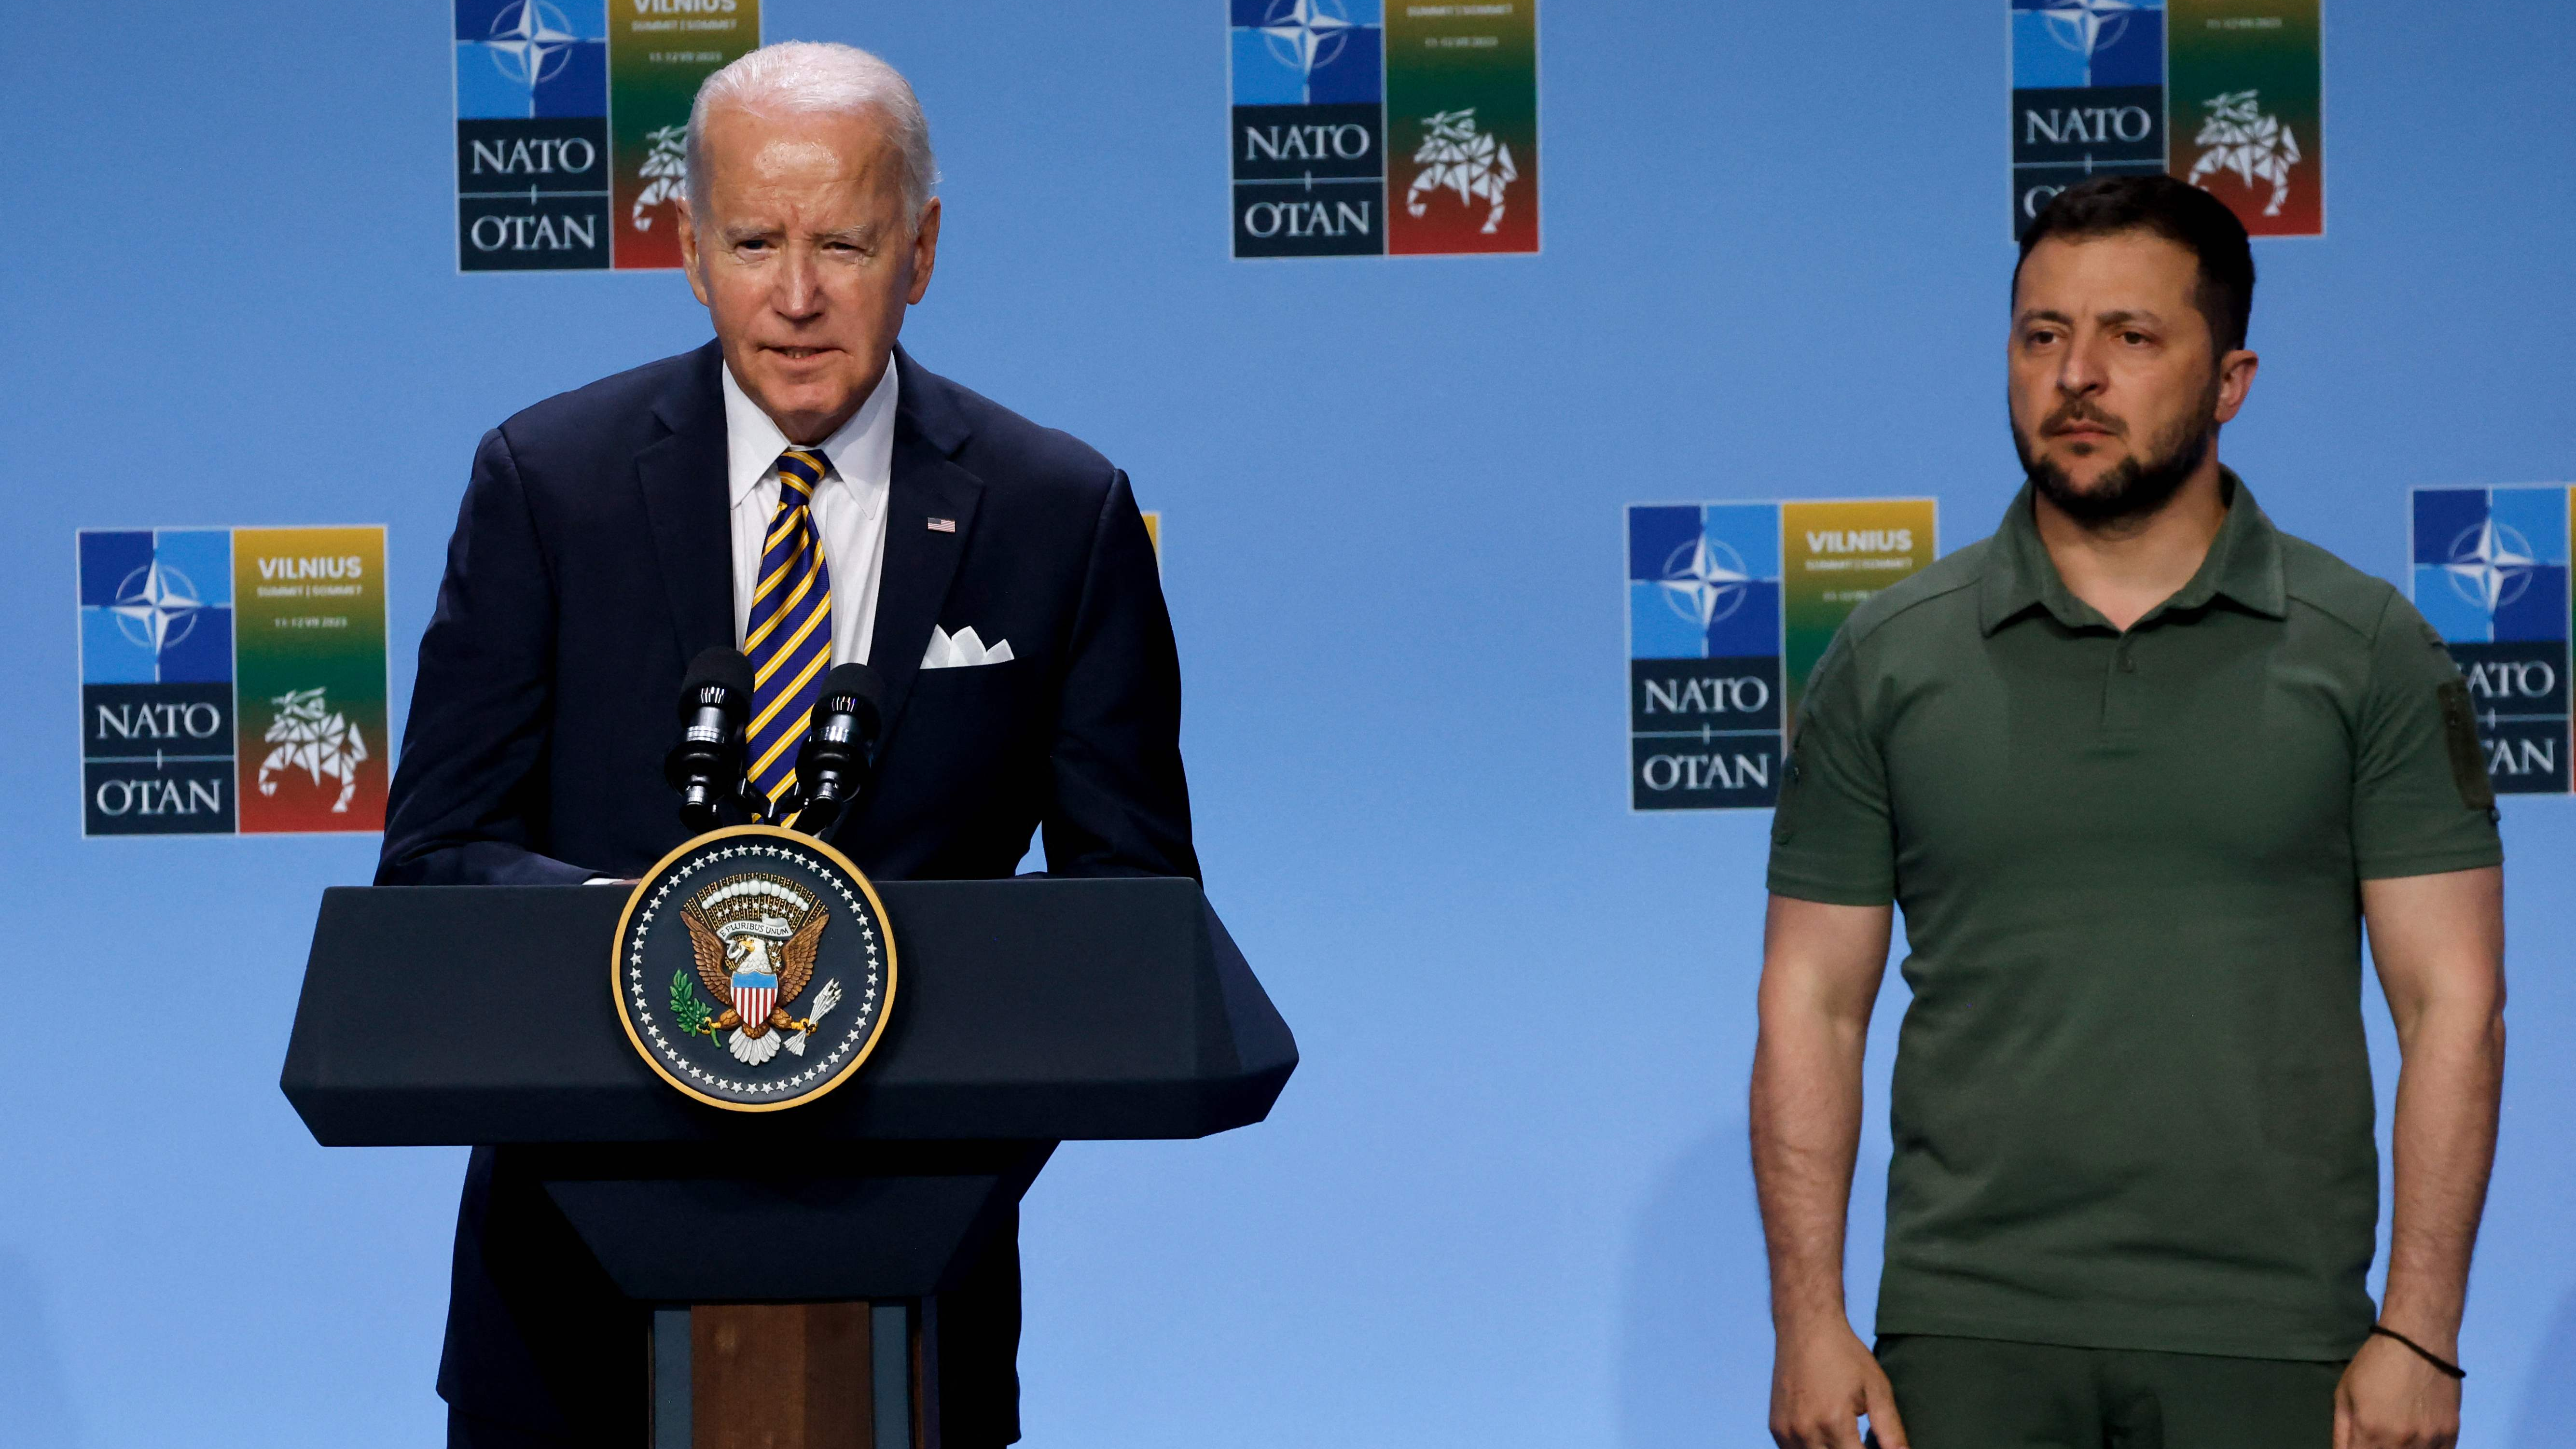 U.S. President Joe Biden (L) delivers his speech as he is flanked by Ukraine's President Volodymyr Zelenskyy during an event with G7 leaders to announce a Joint Declaration of Support for Ukraine during the NATO Summit in Vilnius, Lithuania, July 12, 2023. /AFP